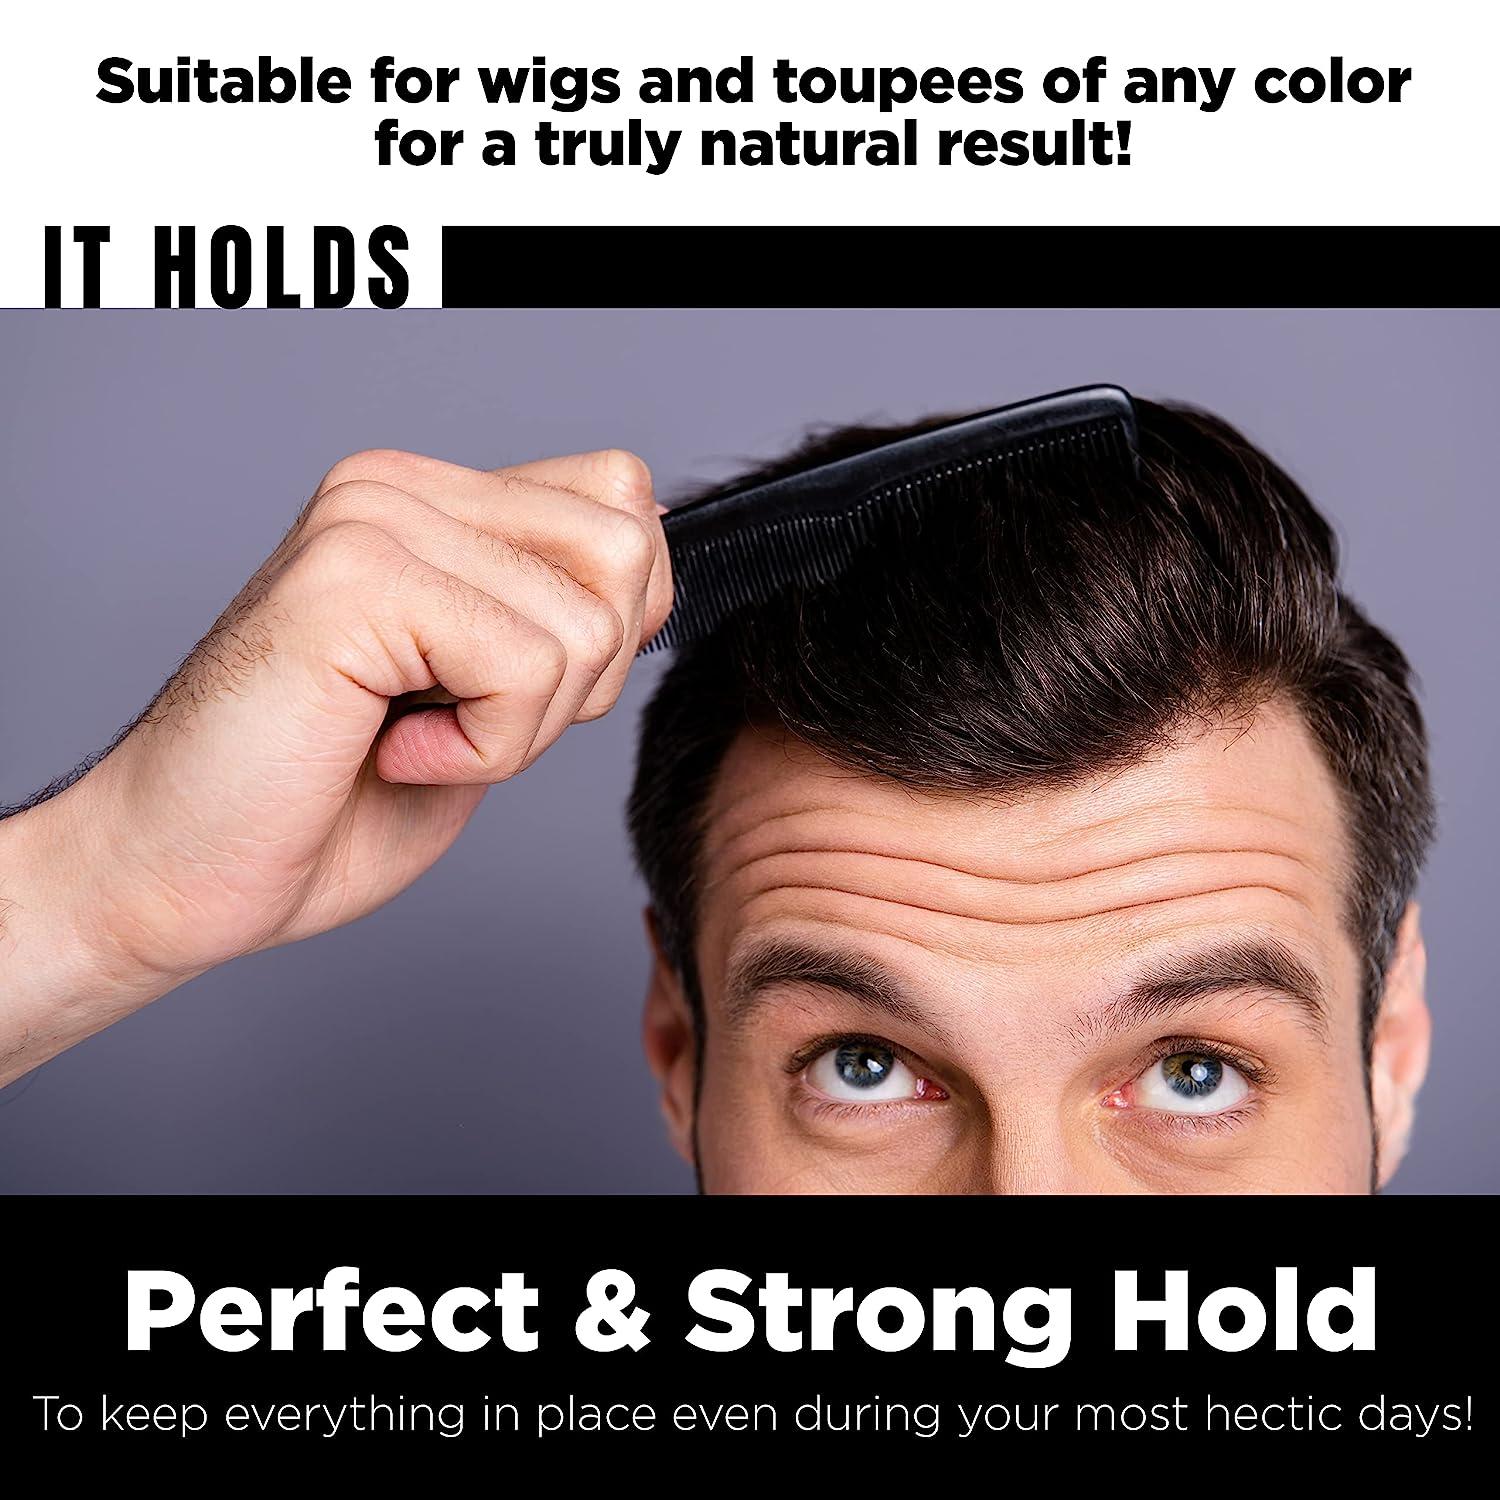 IT HOLDS Roll On Body Adhesive, Sweat Resistant, For Oily and Dry Skin,  Clear & Non-Toxic- 2.0 Ounce Made In USA